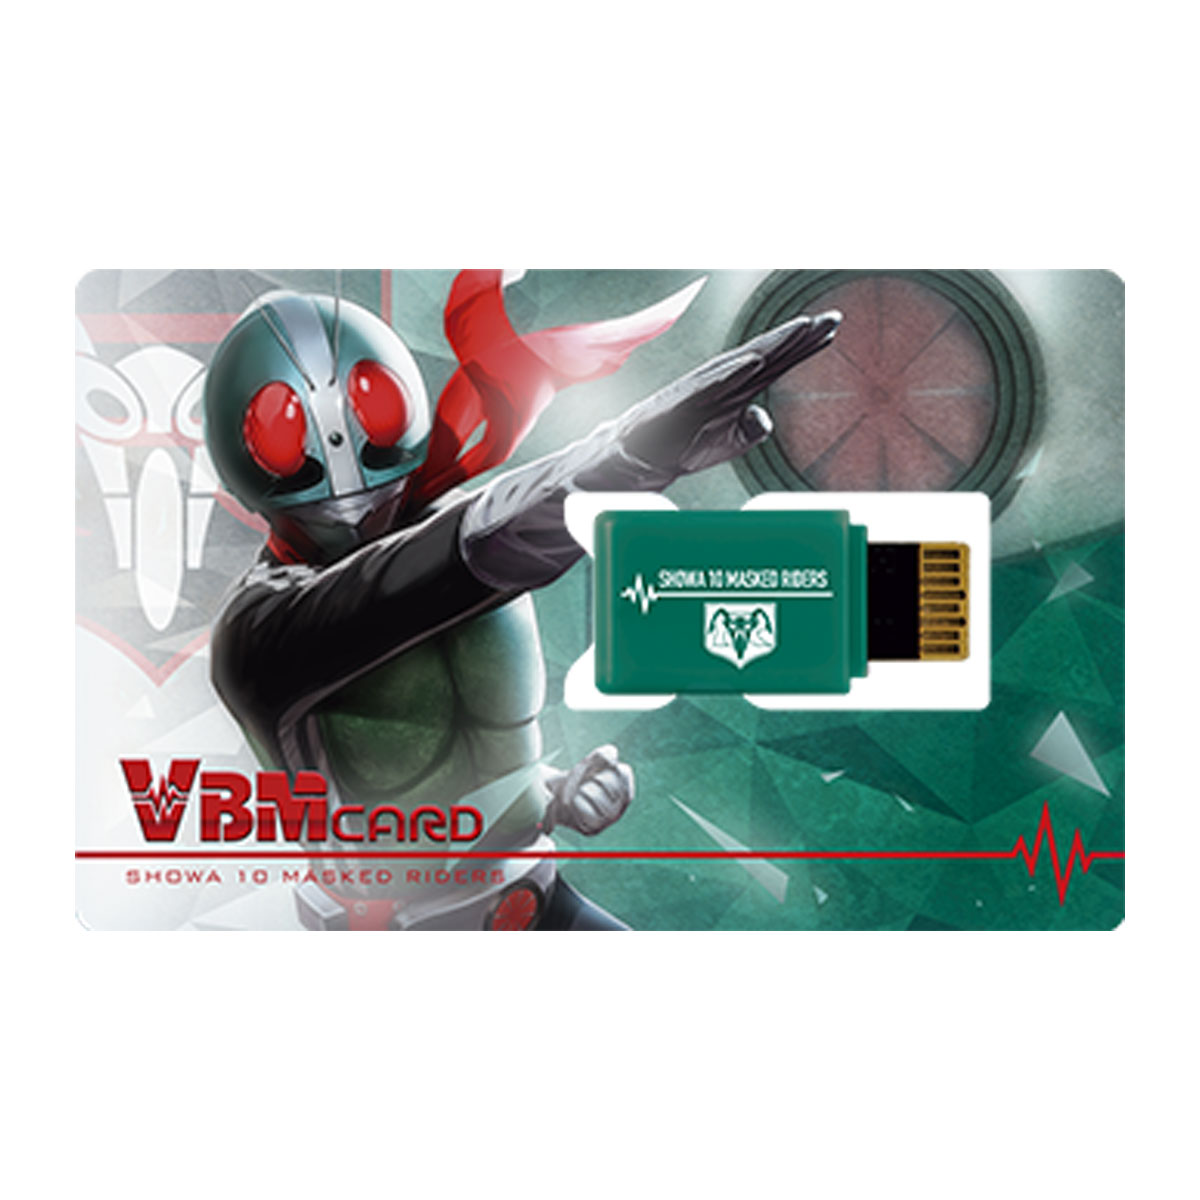 VITAL BRACELET Characters ver. Masked Rider Premium Bandai exclusive [Jul 2022 Delivery]